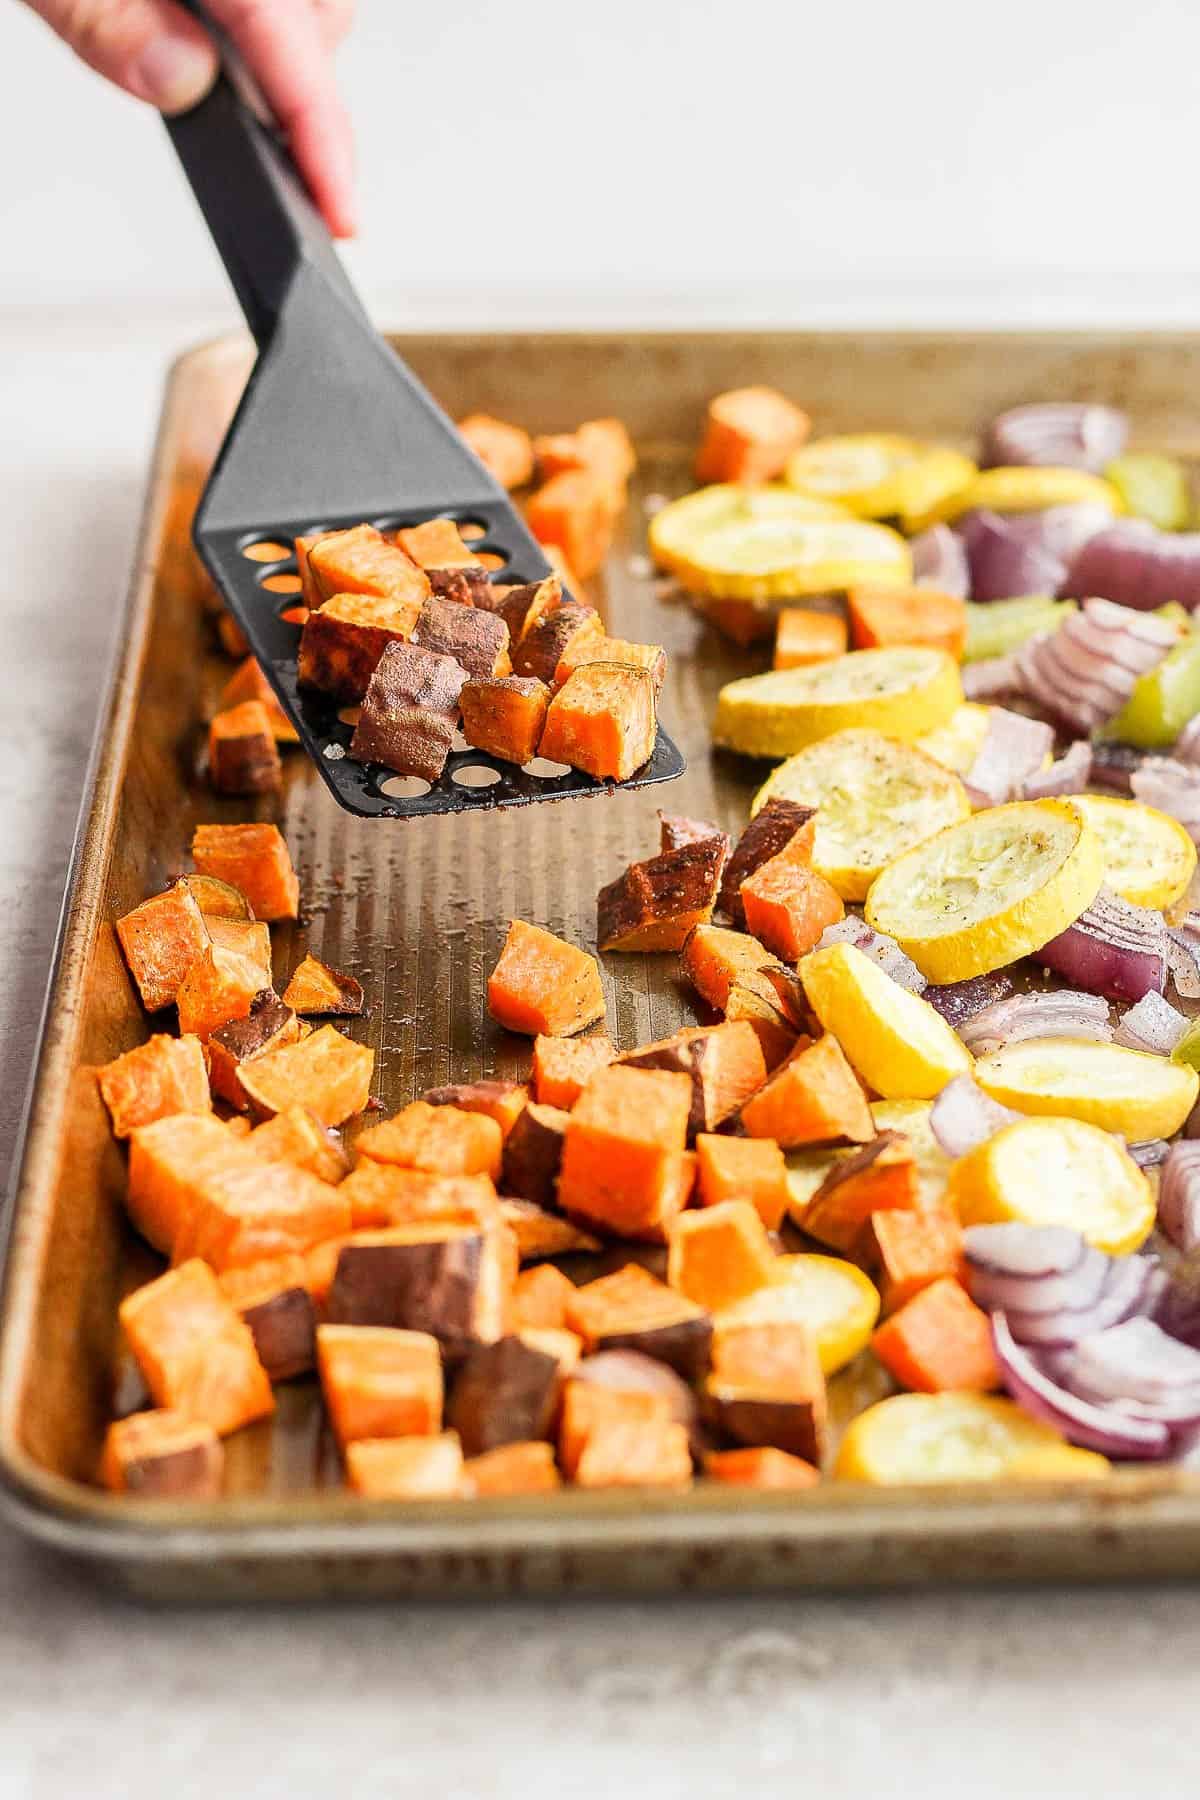 Spatula scraping roasted vegetables from a baking dish